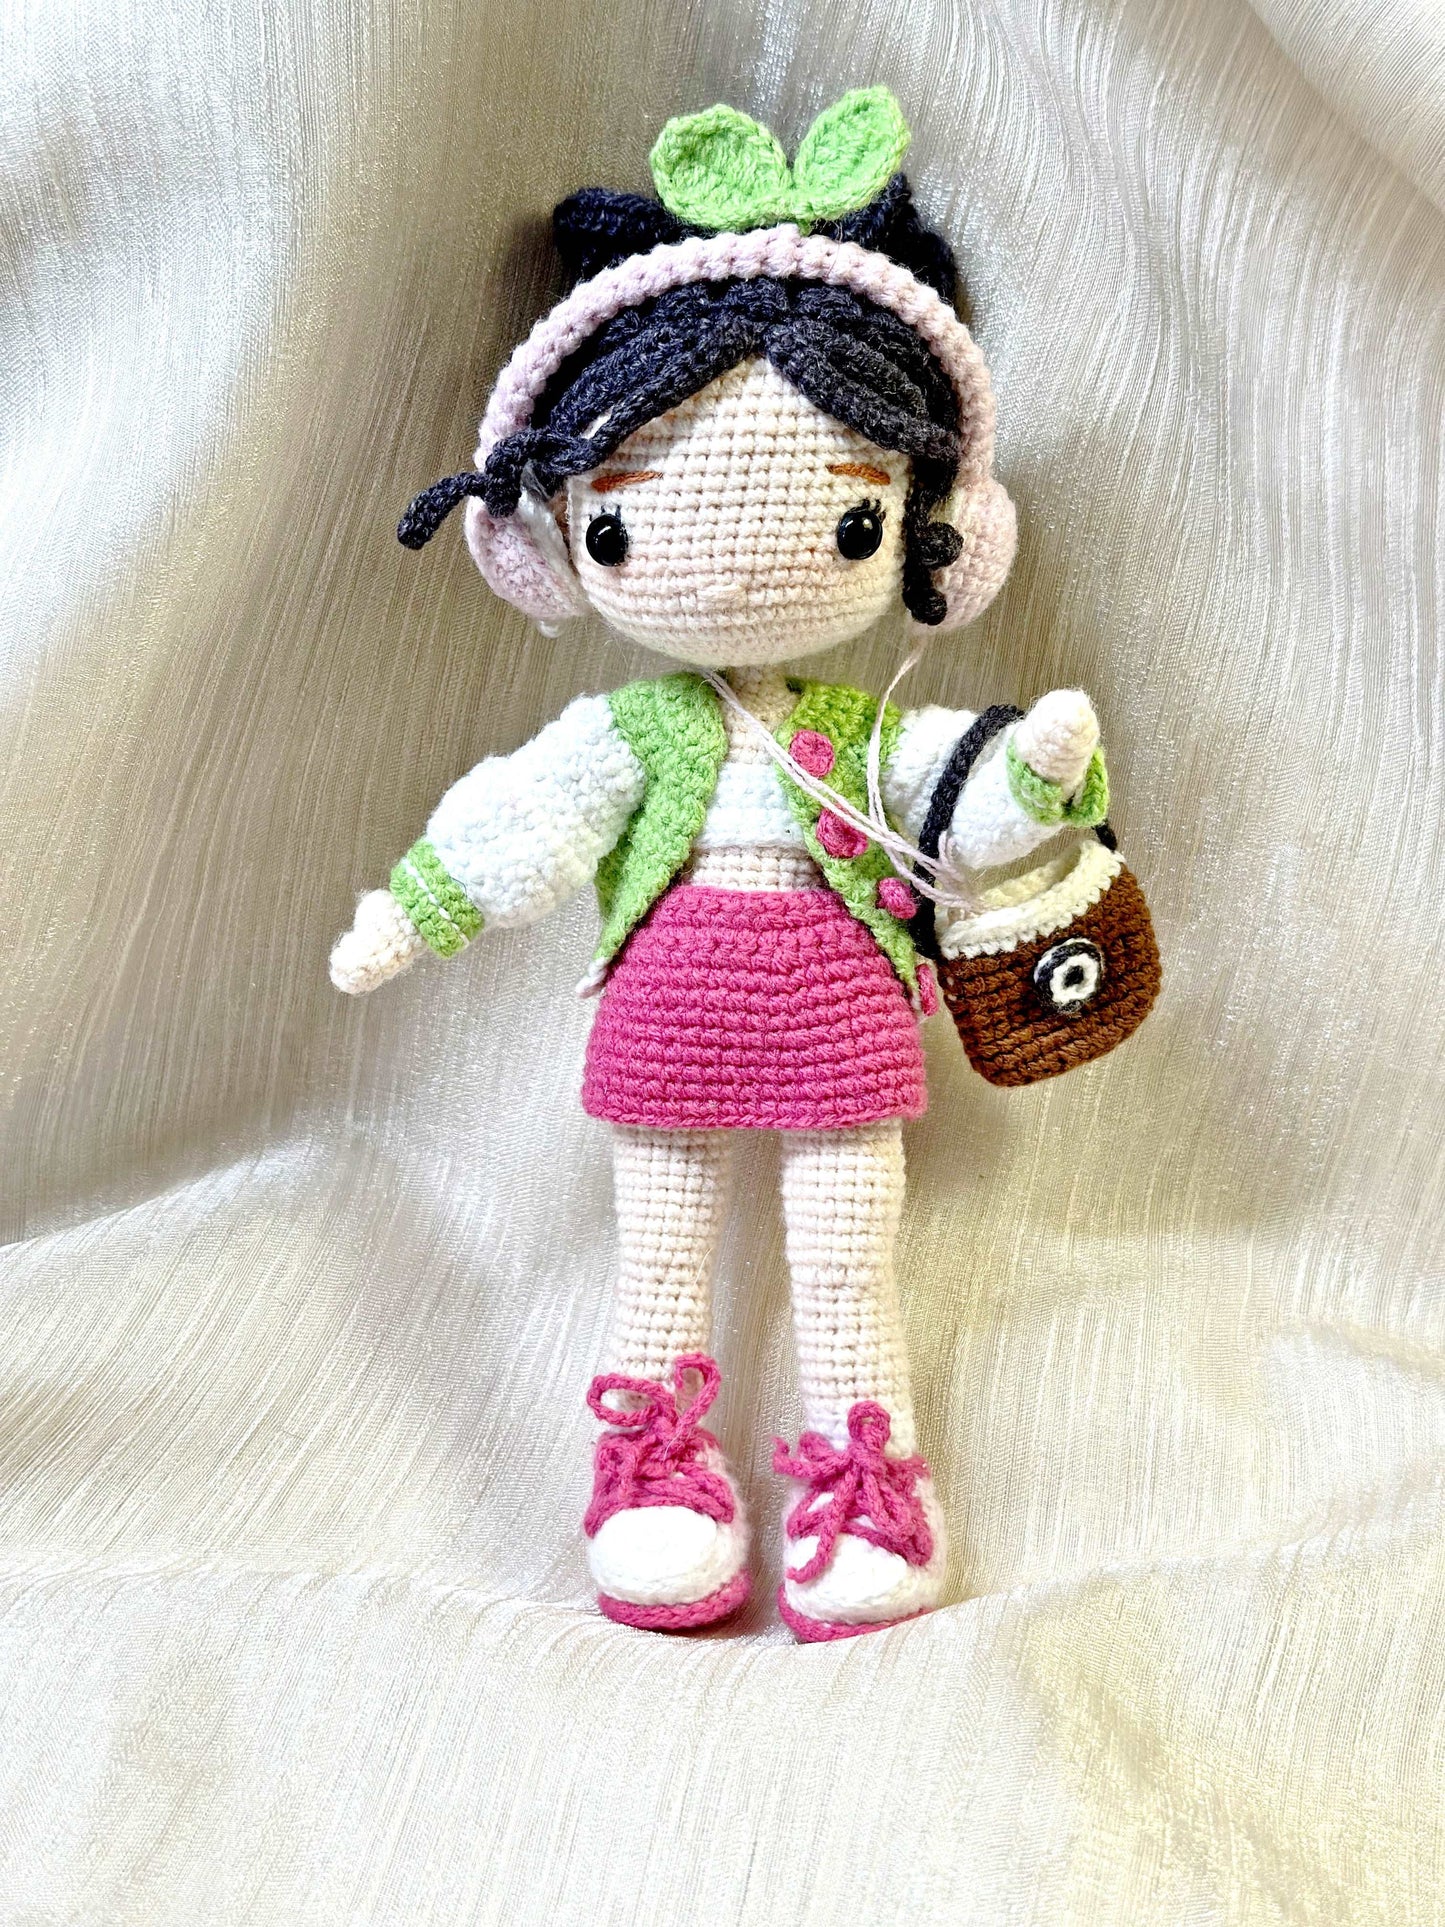 Soft Knitted Girl Doll for Gift-Giving